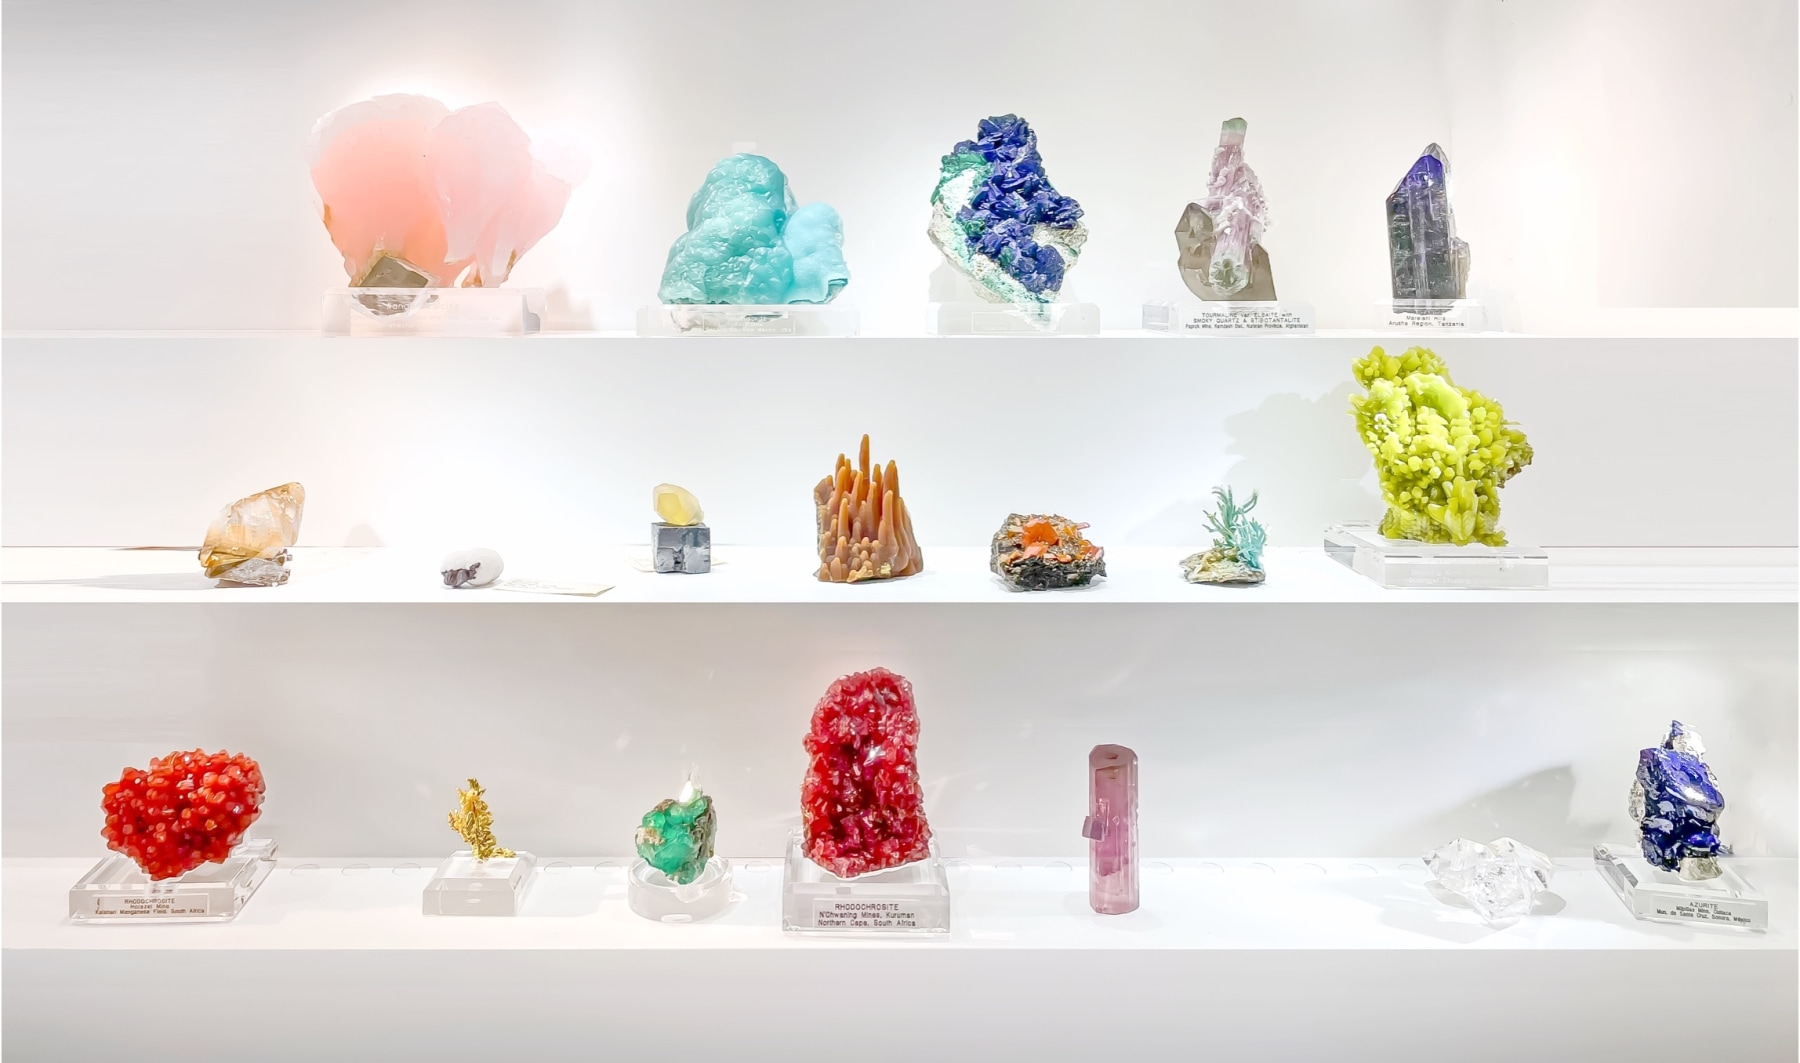 A full-service dealer dedicated to sourcing the world&amp;rsquo;s finest mineral specimens and making them available to discerning connoisseurs and collectors worldwide.